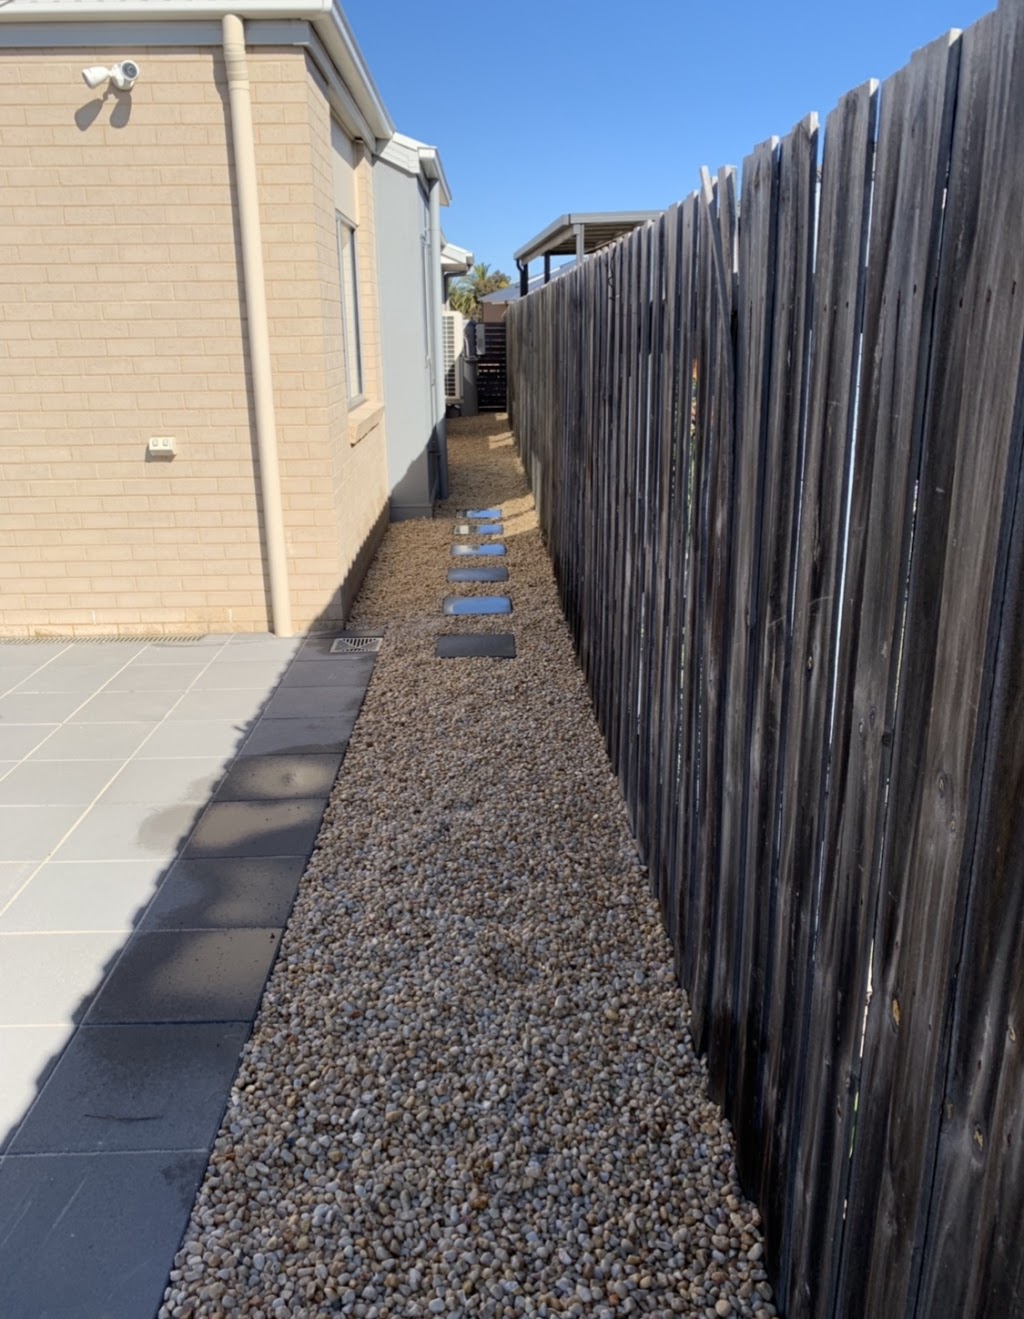 Rivermouth landscaping | 174 Rivermouth Rd, Eagle Point VIC 3878, Australia | Phone: 0400 100 046